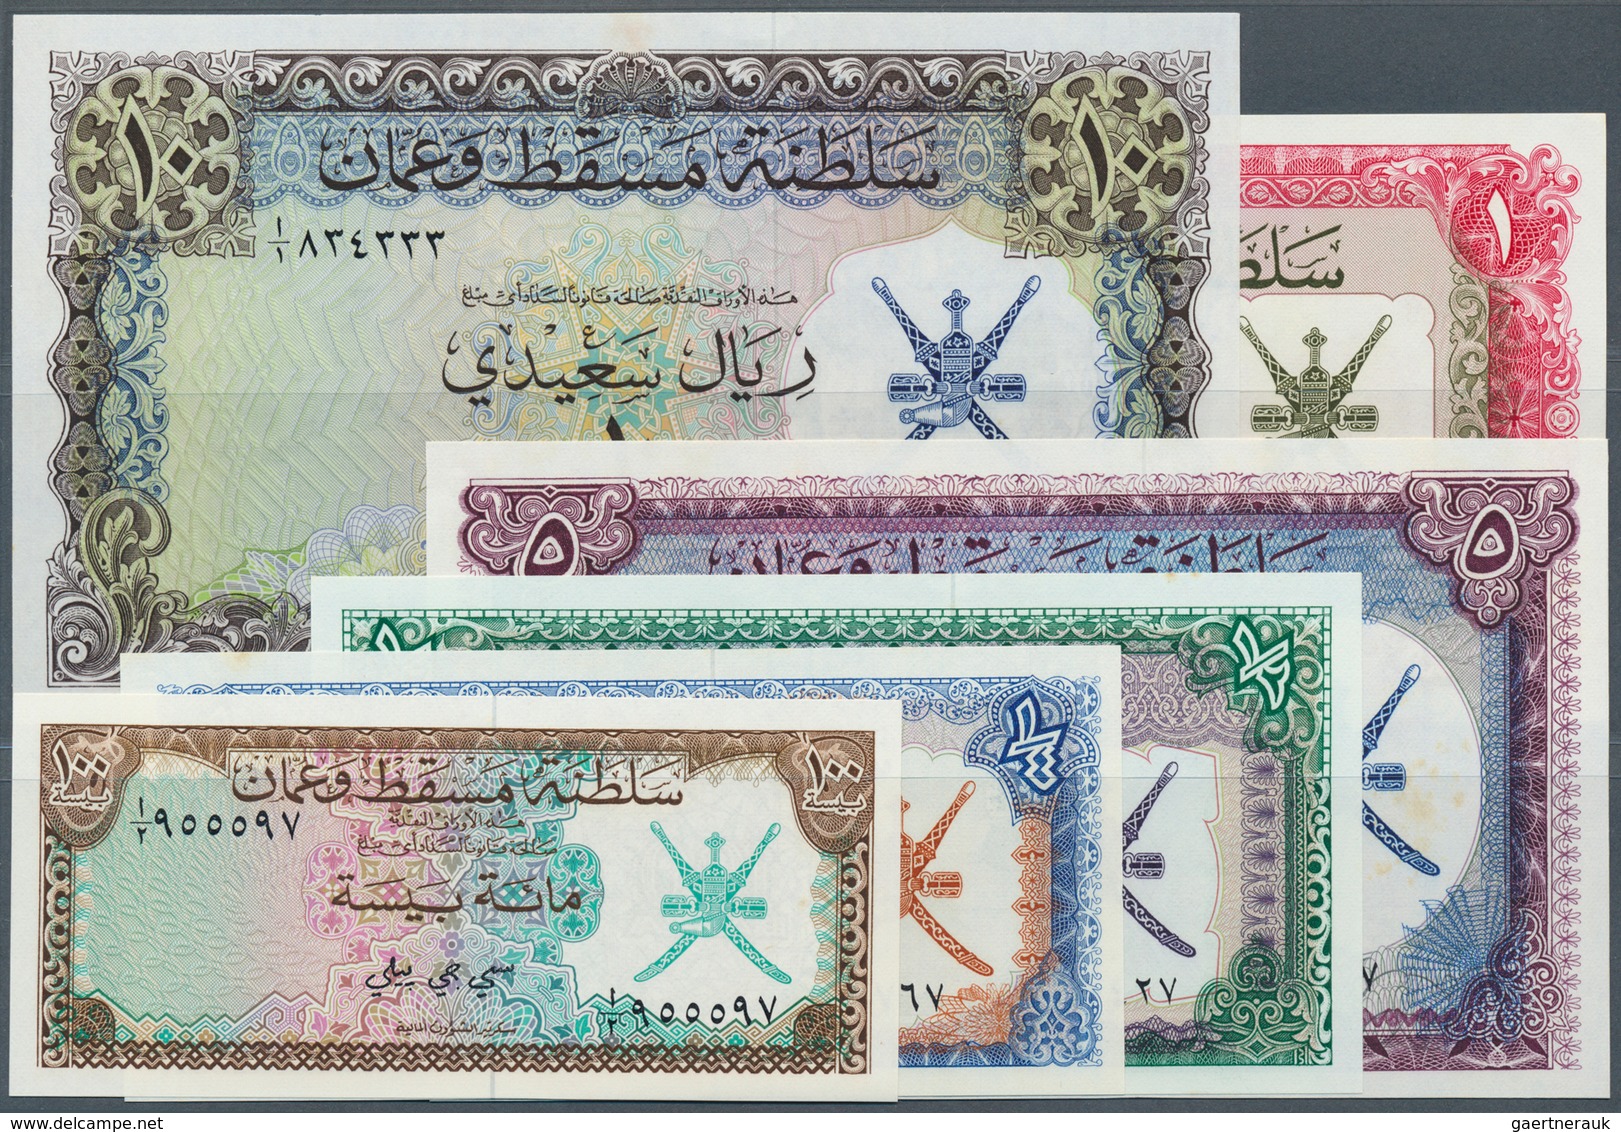 02177 Oman: Muscat & Oman Complete Set From 100 Baisa To 10 Rials ND P. 1-6, The 1/4, 5, 10 And 1 Rials In - Oman